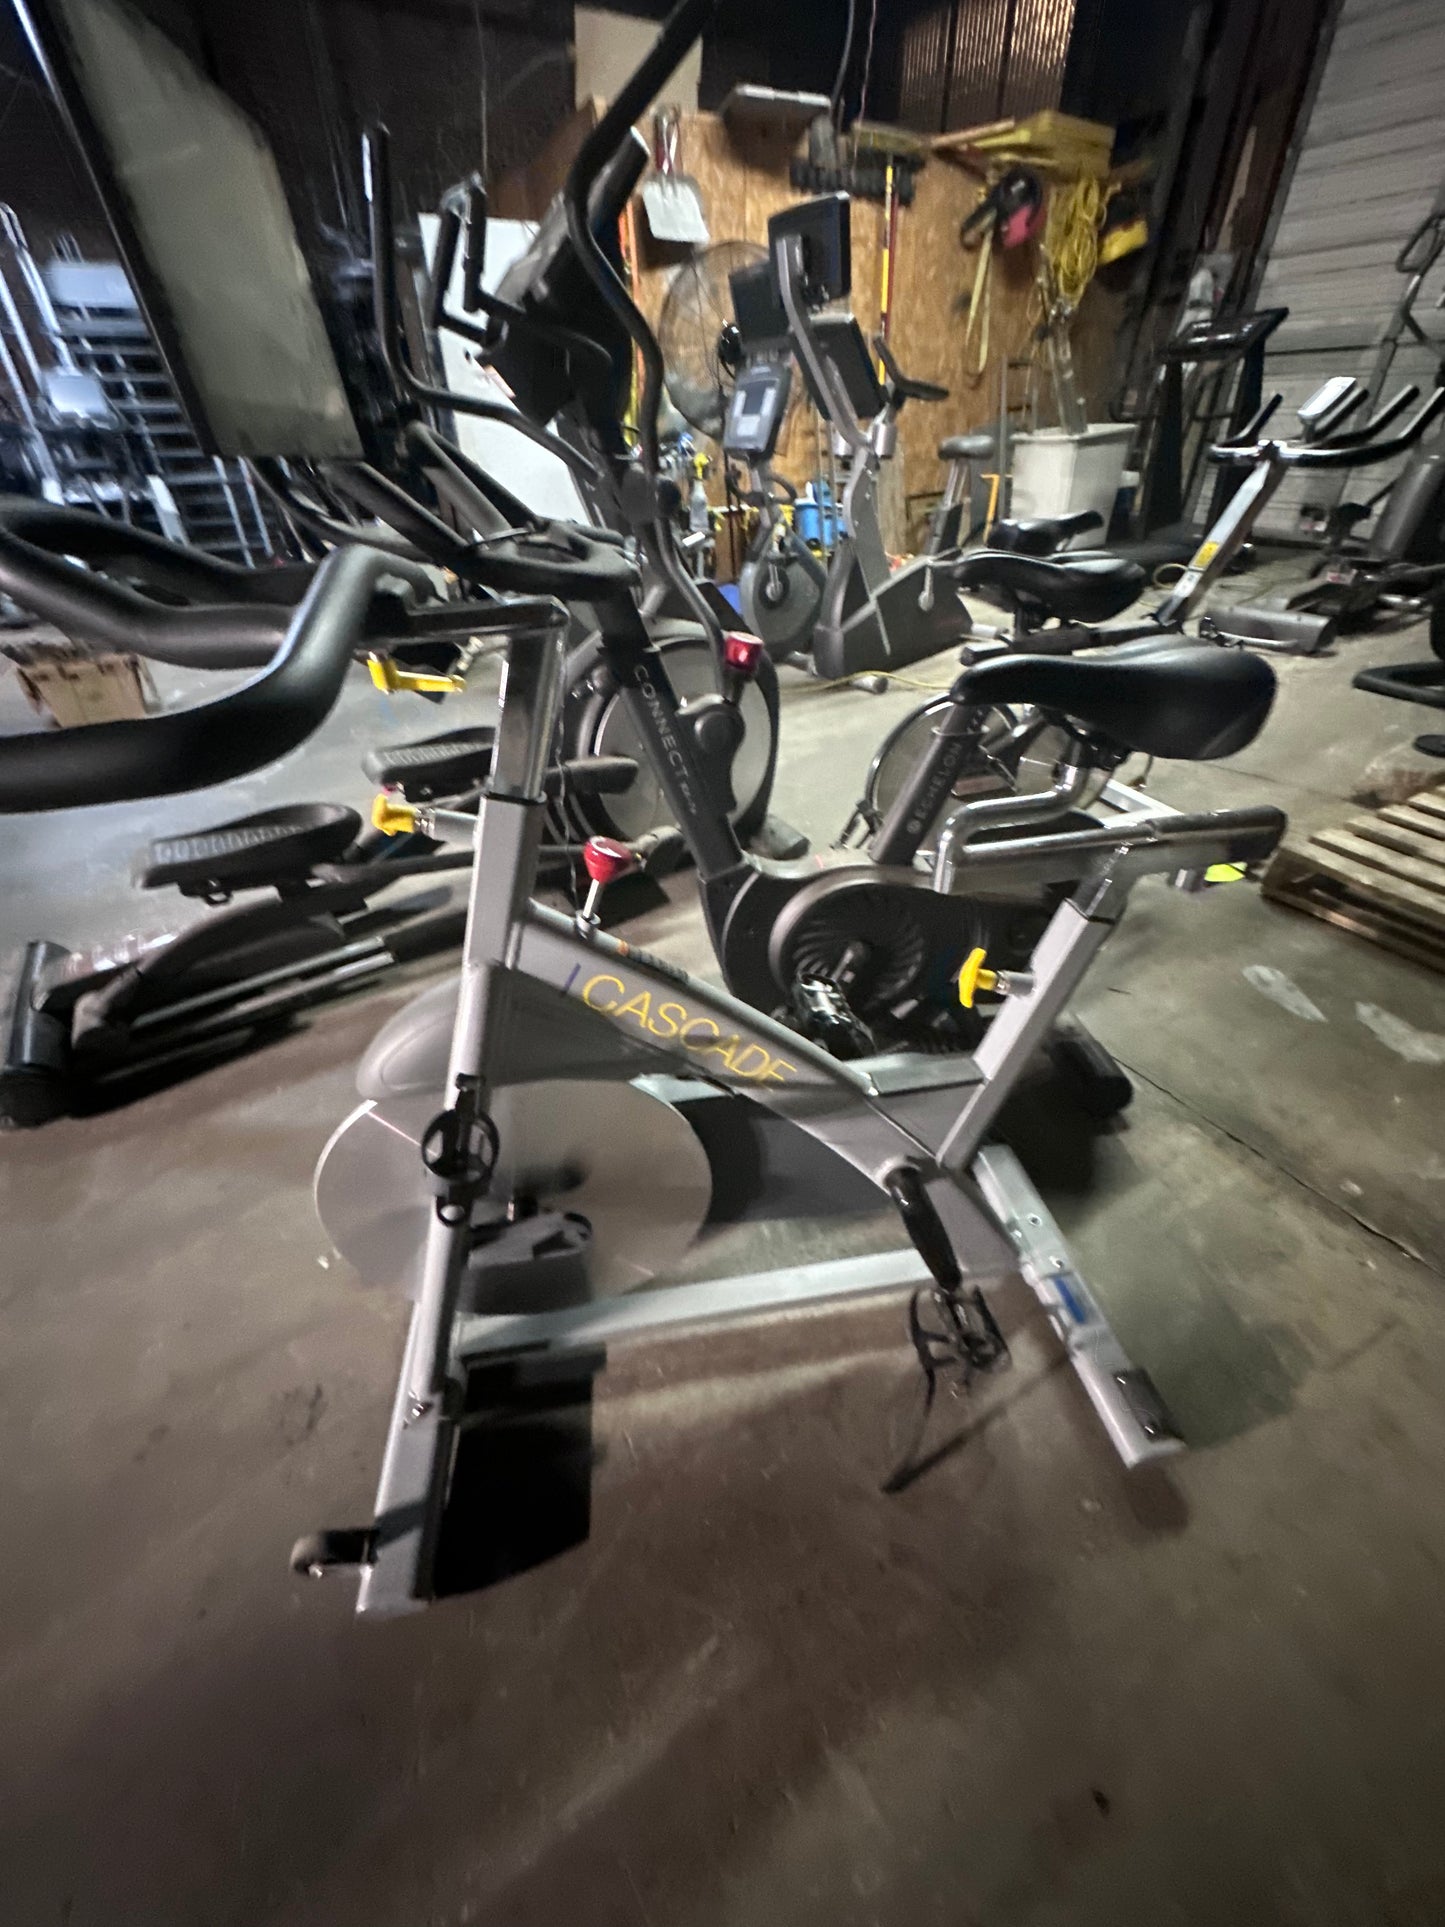 Pre-Owned Cascade Spin Exercise Bike - ExerciseUnlimited